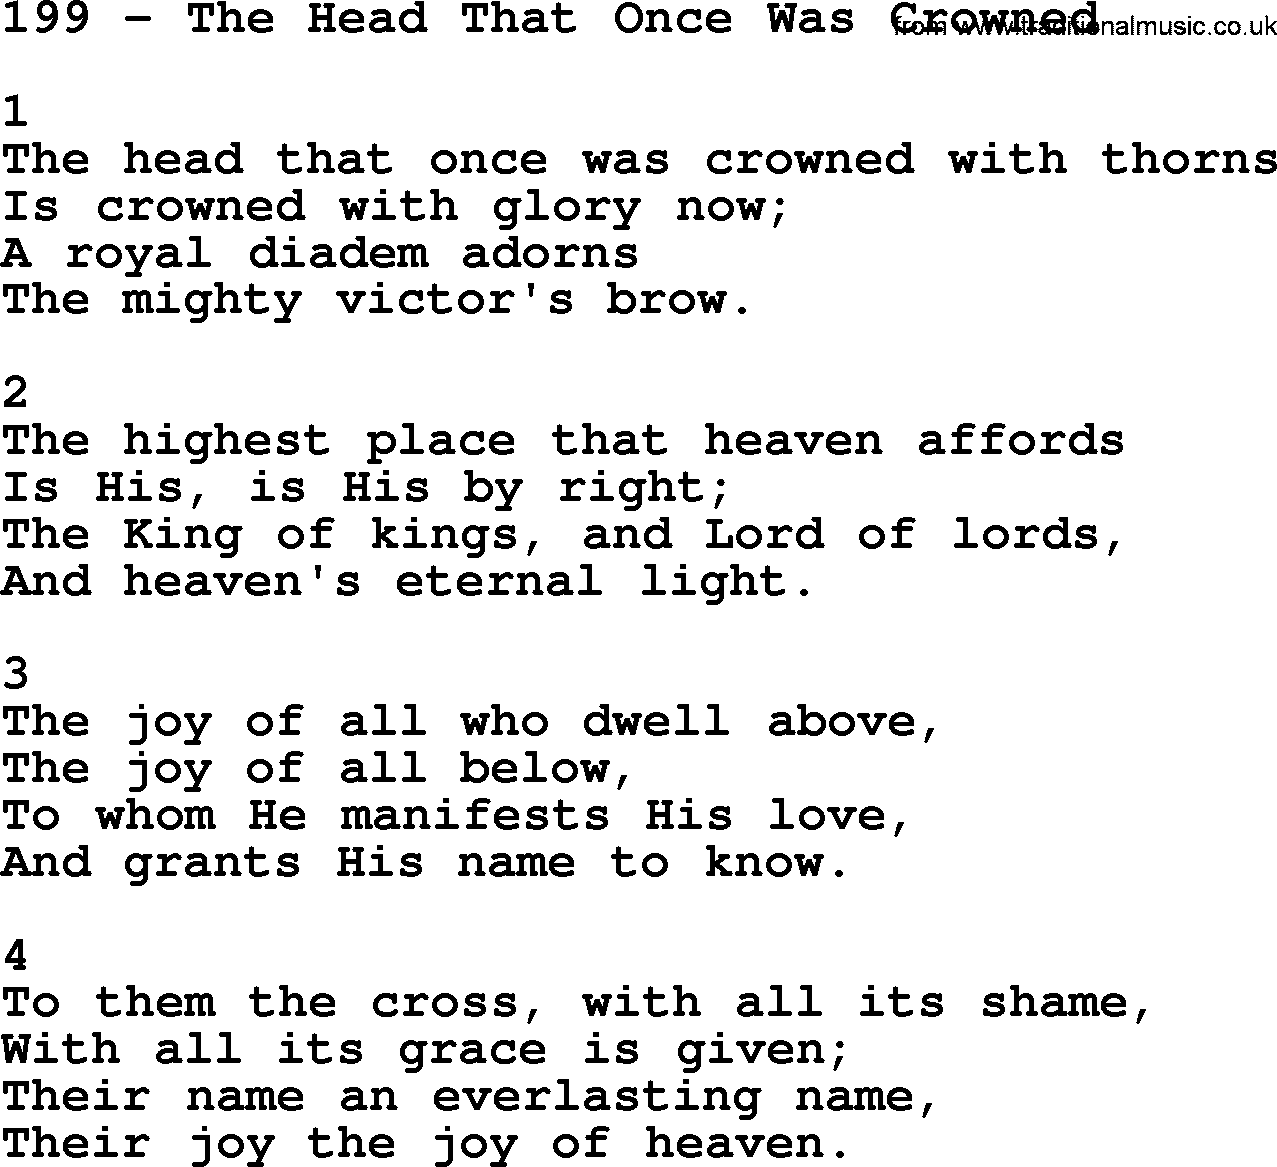 Complete Adventis Hymnal, title: 199-The Head That Once Was Crowned, with lyrics, midi, mp3, powerpoints(PPT) and PDF,